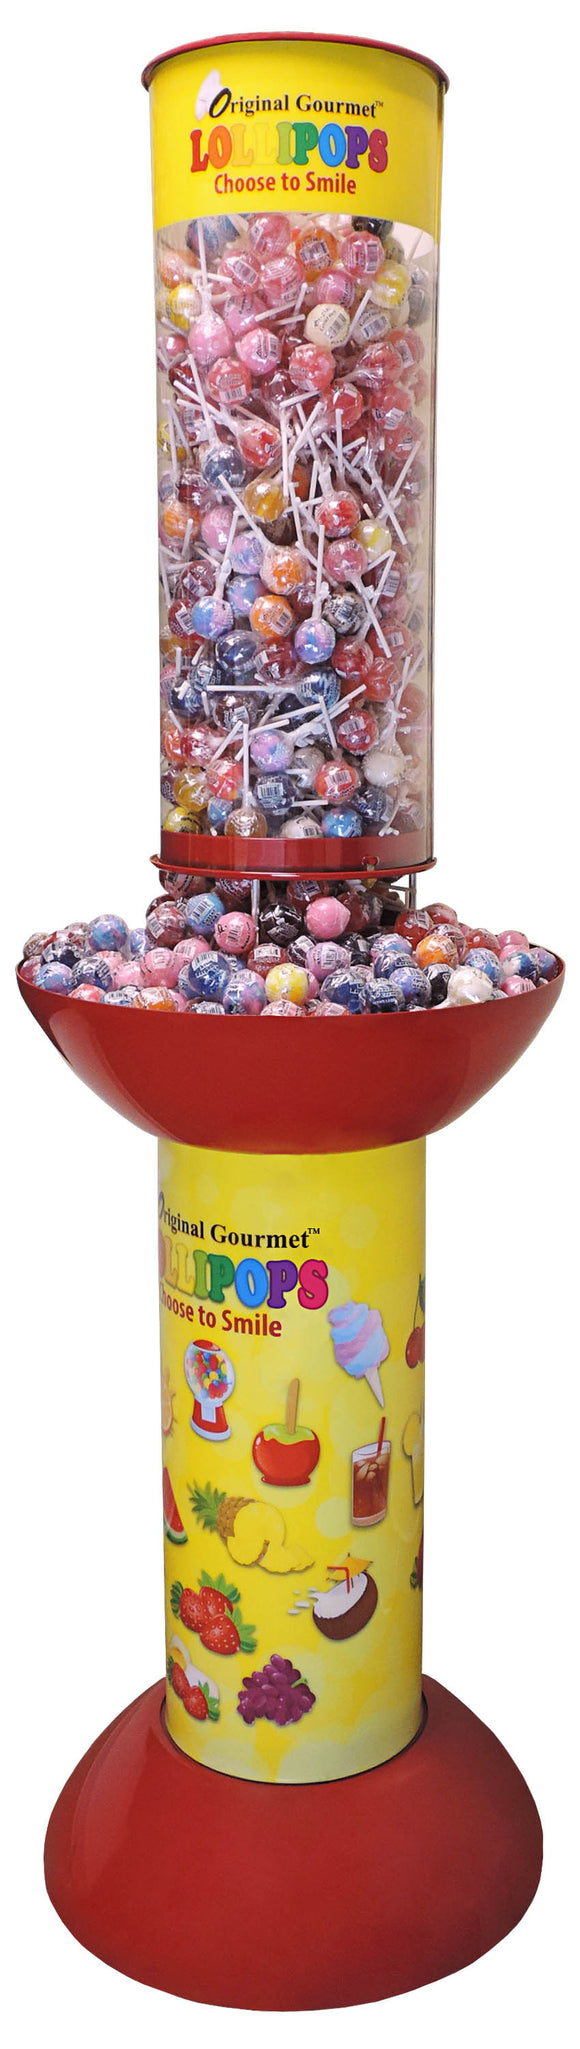 Tall cylinder clear plastic display box full of lollipops gravity fed to an open bowl area where you can grab the lollipops. The top front of the display reads Original gourmet lollipops choose to smile.